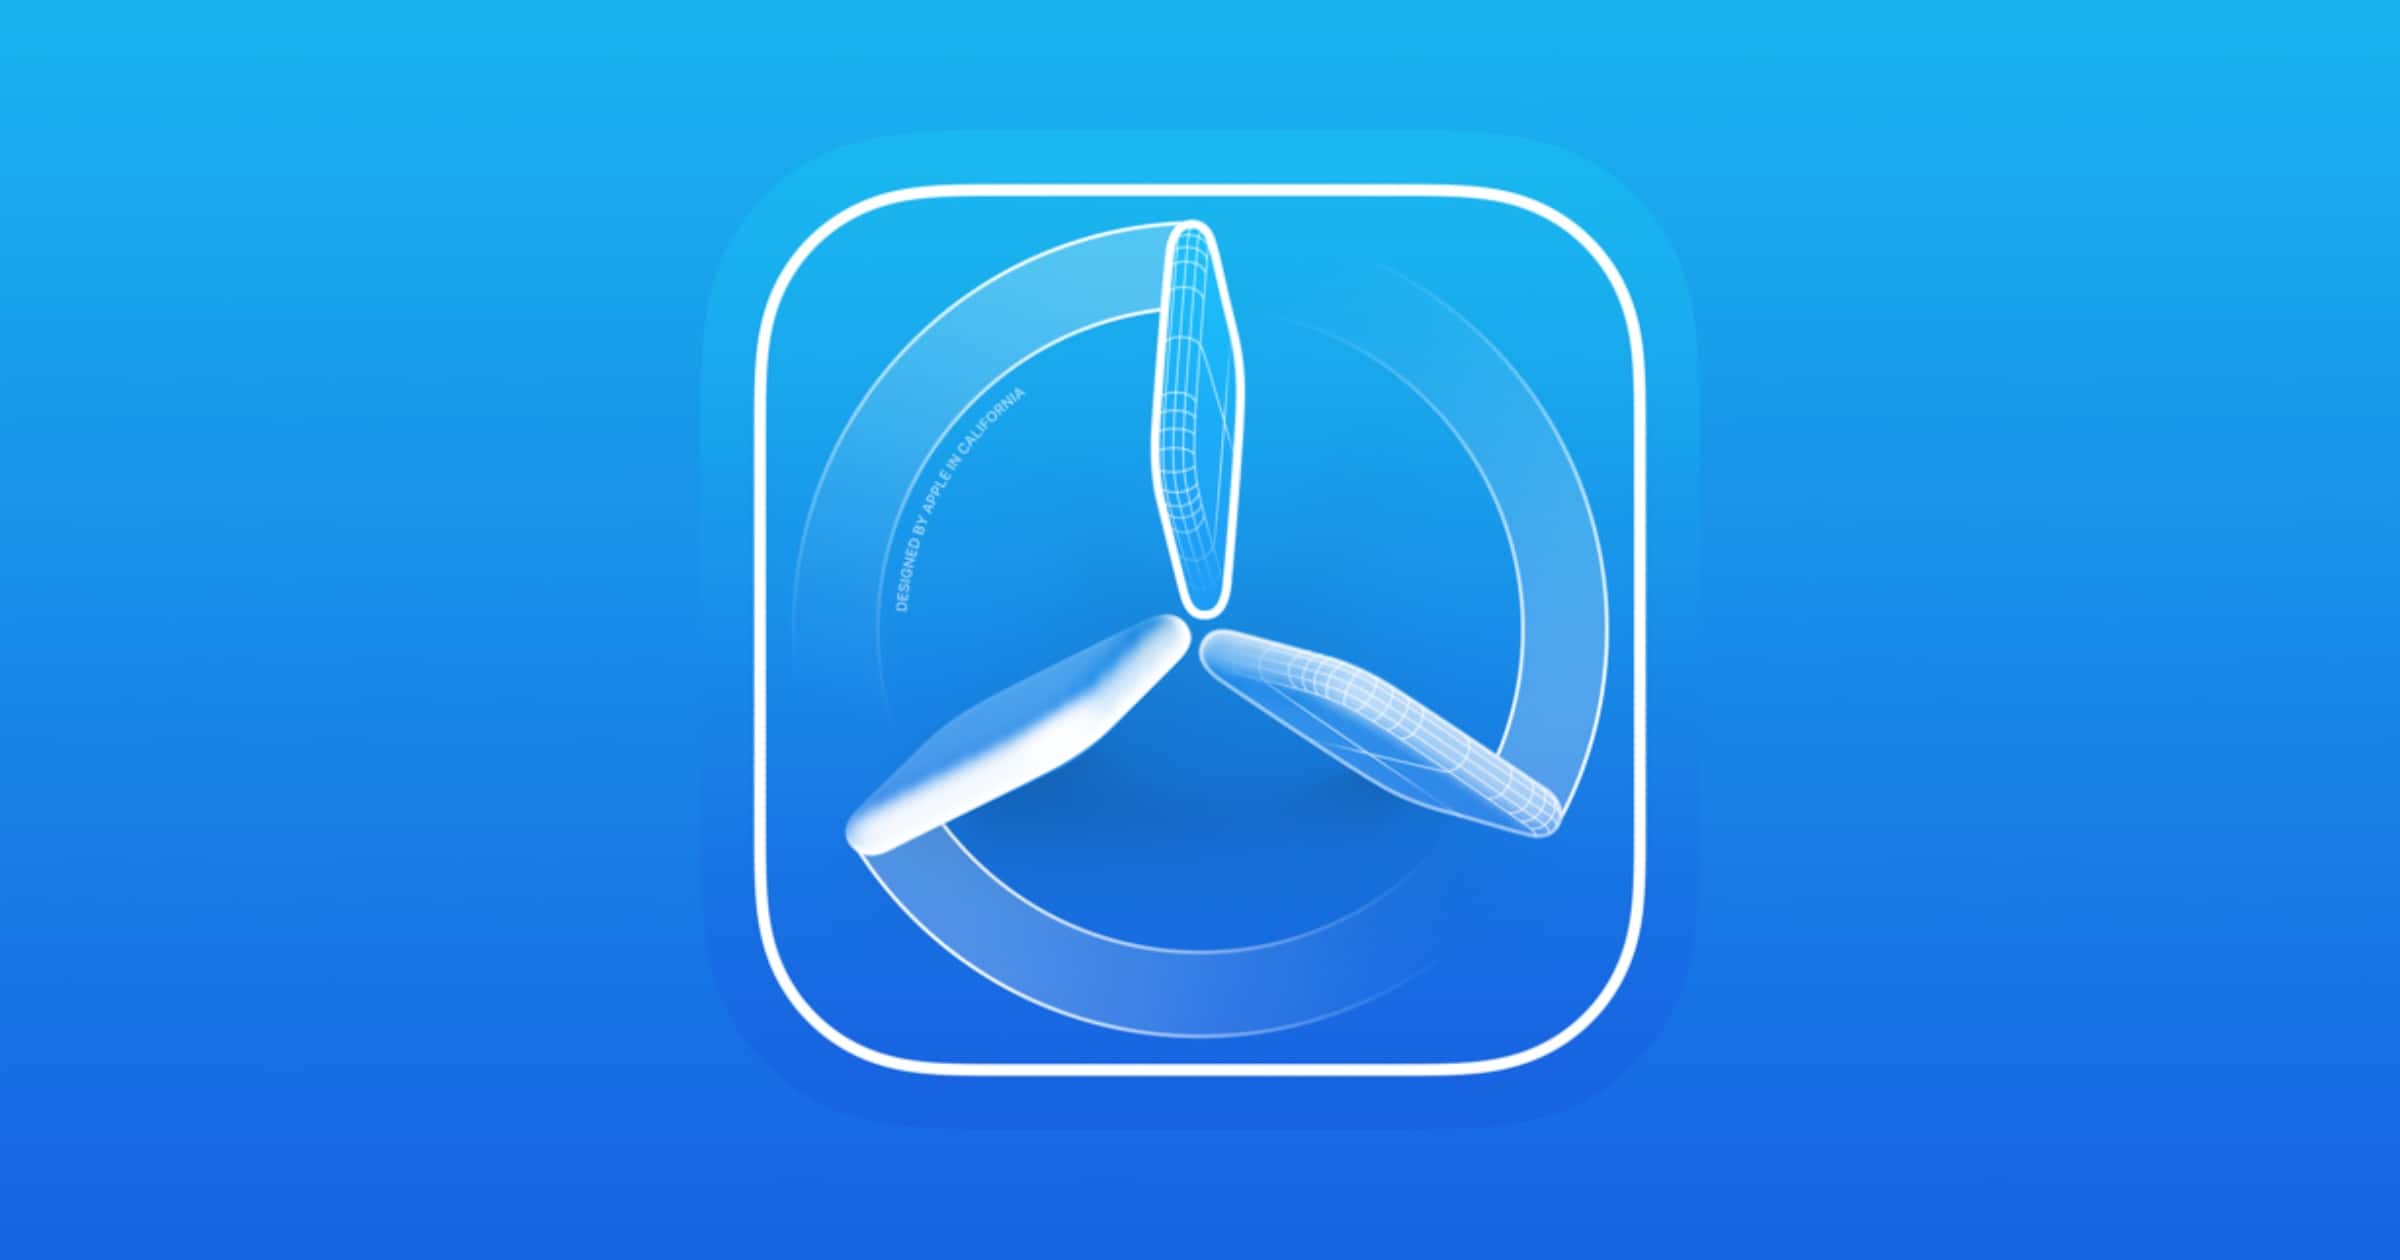 Some Developers Use TestFlight as an Unofficial App Store